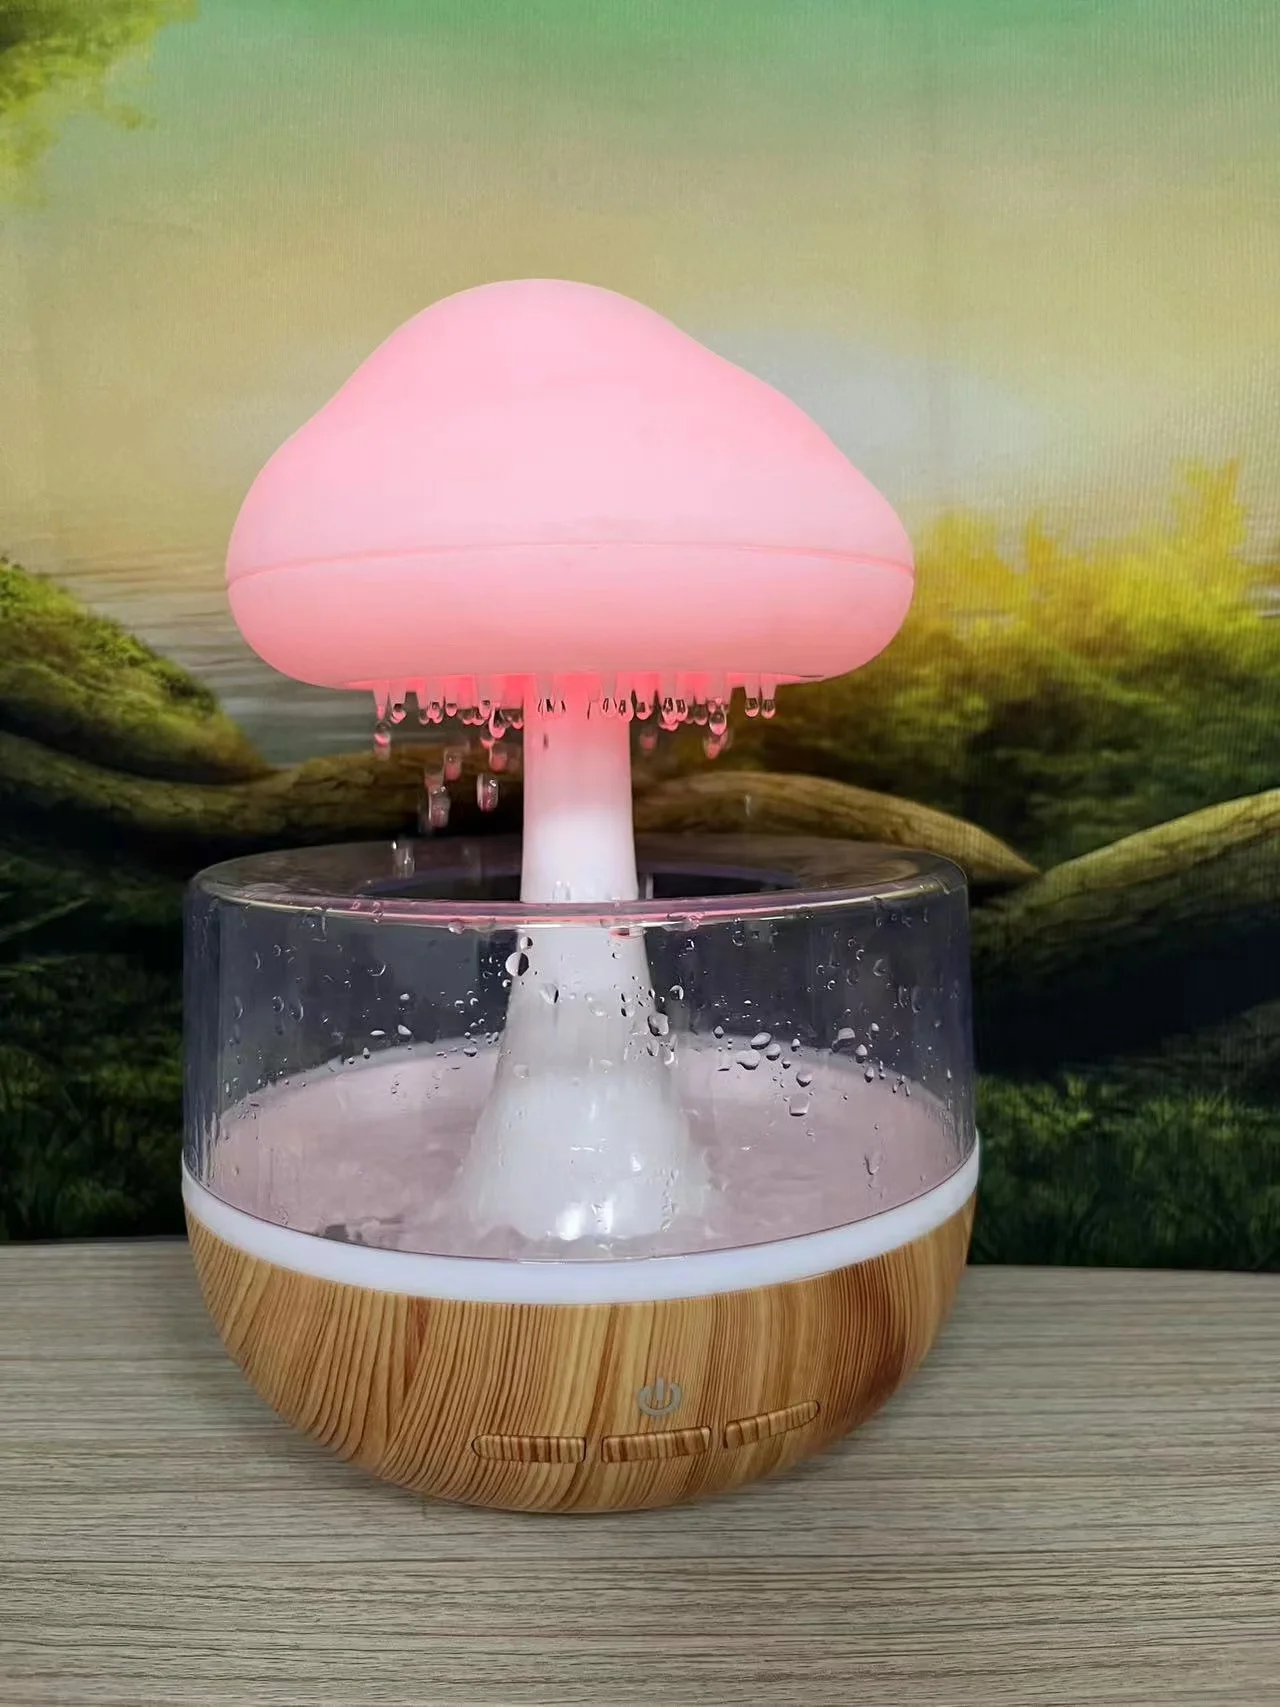 Factory Direct Sale Raining Cloud Humidifier with Night Lights Aromatherapy Essential- Oil Diffuser air diffuser